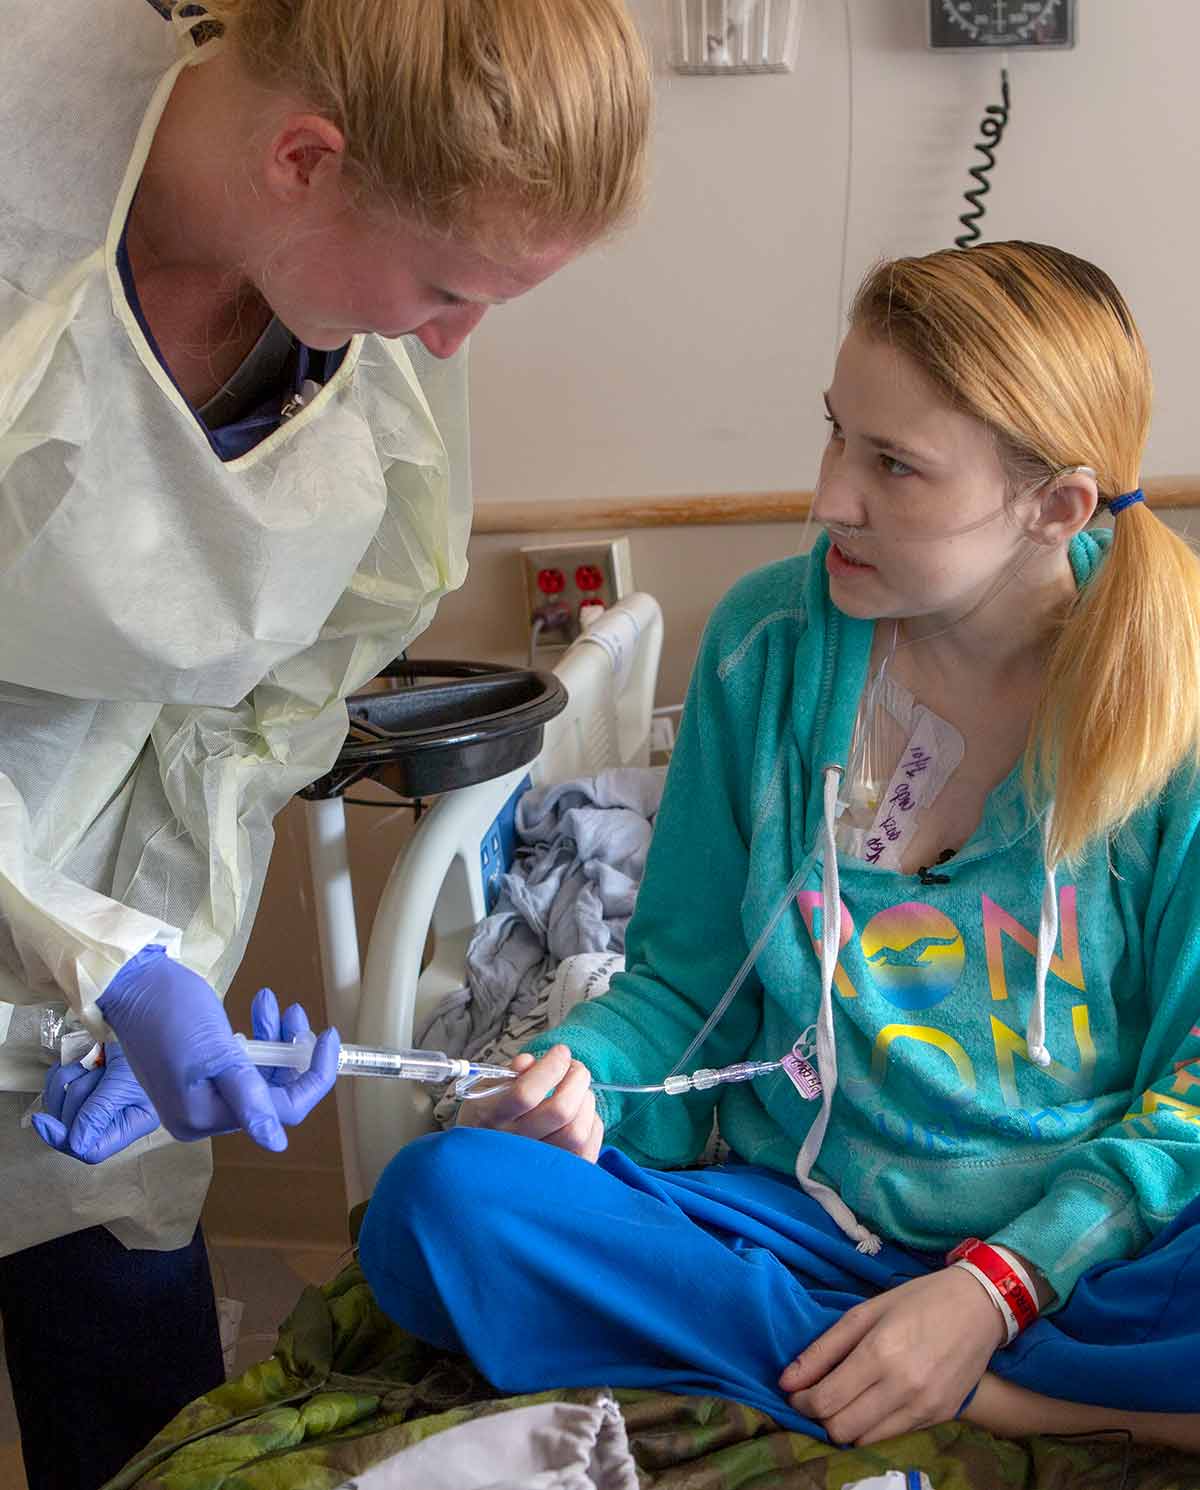 Alyssa Kibler sits in her hospital bed at Penn State Health Milton S. Hershey Medical Center, holding some clear tubing in her hand that is connected to a vial of medicine that registered nurse Amy Koffman has in her hands. Koffman wears a disposable gown and blue gloves as she leans down toward Kibler. Kibler is wearing a sweatshirt and has her hair in a ponytail.